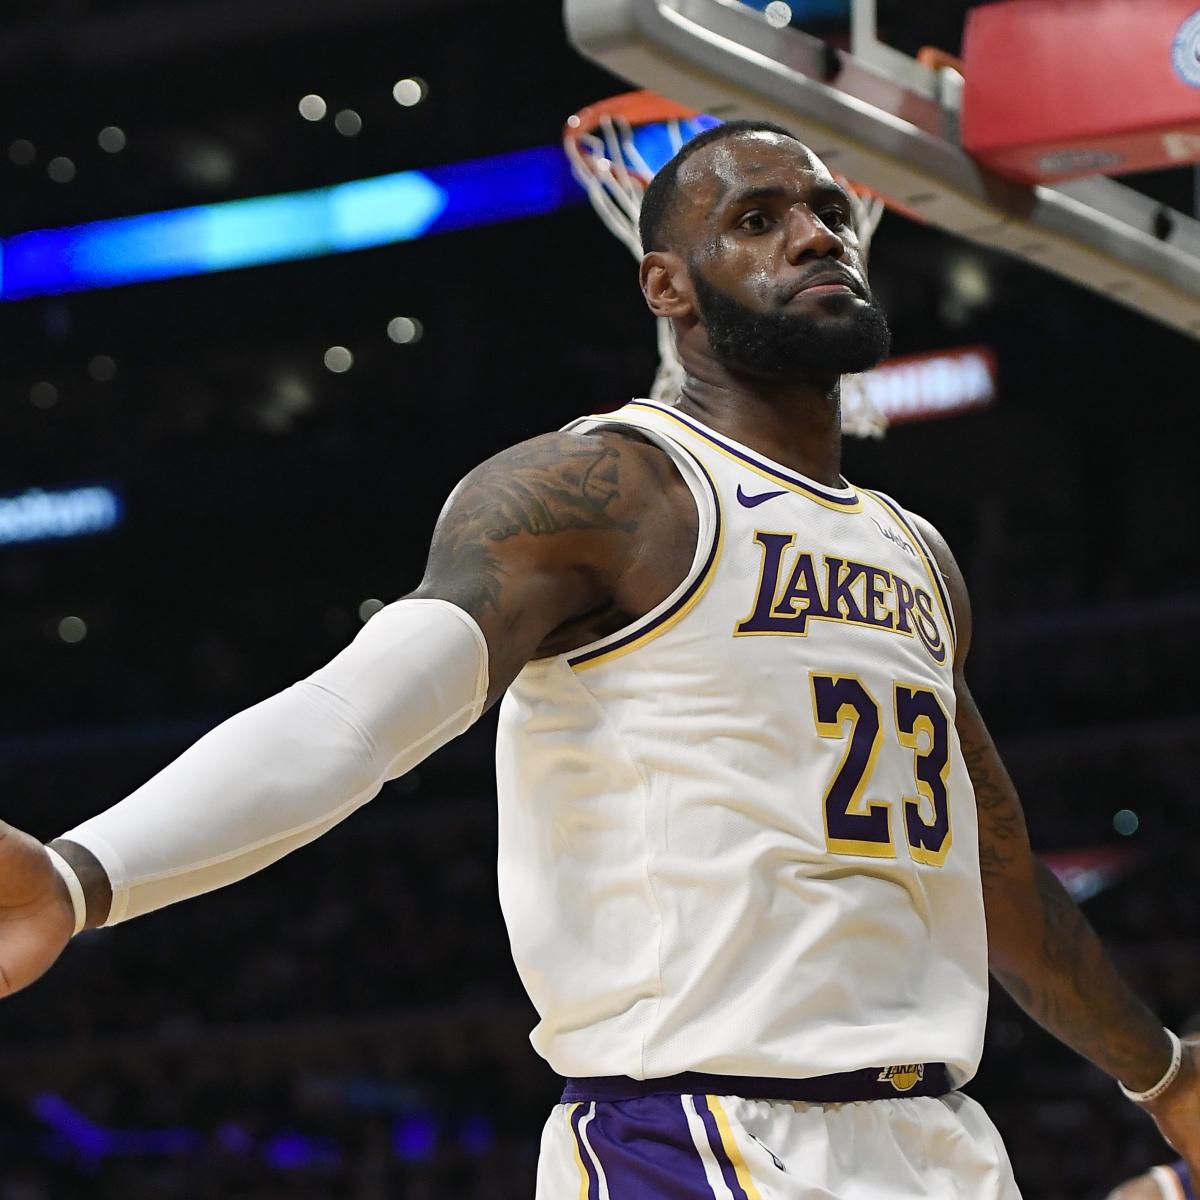 Lakers News: LeBron James Discusses Playing Time, Team's Transformation ...